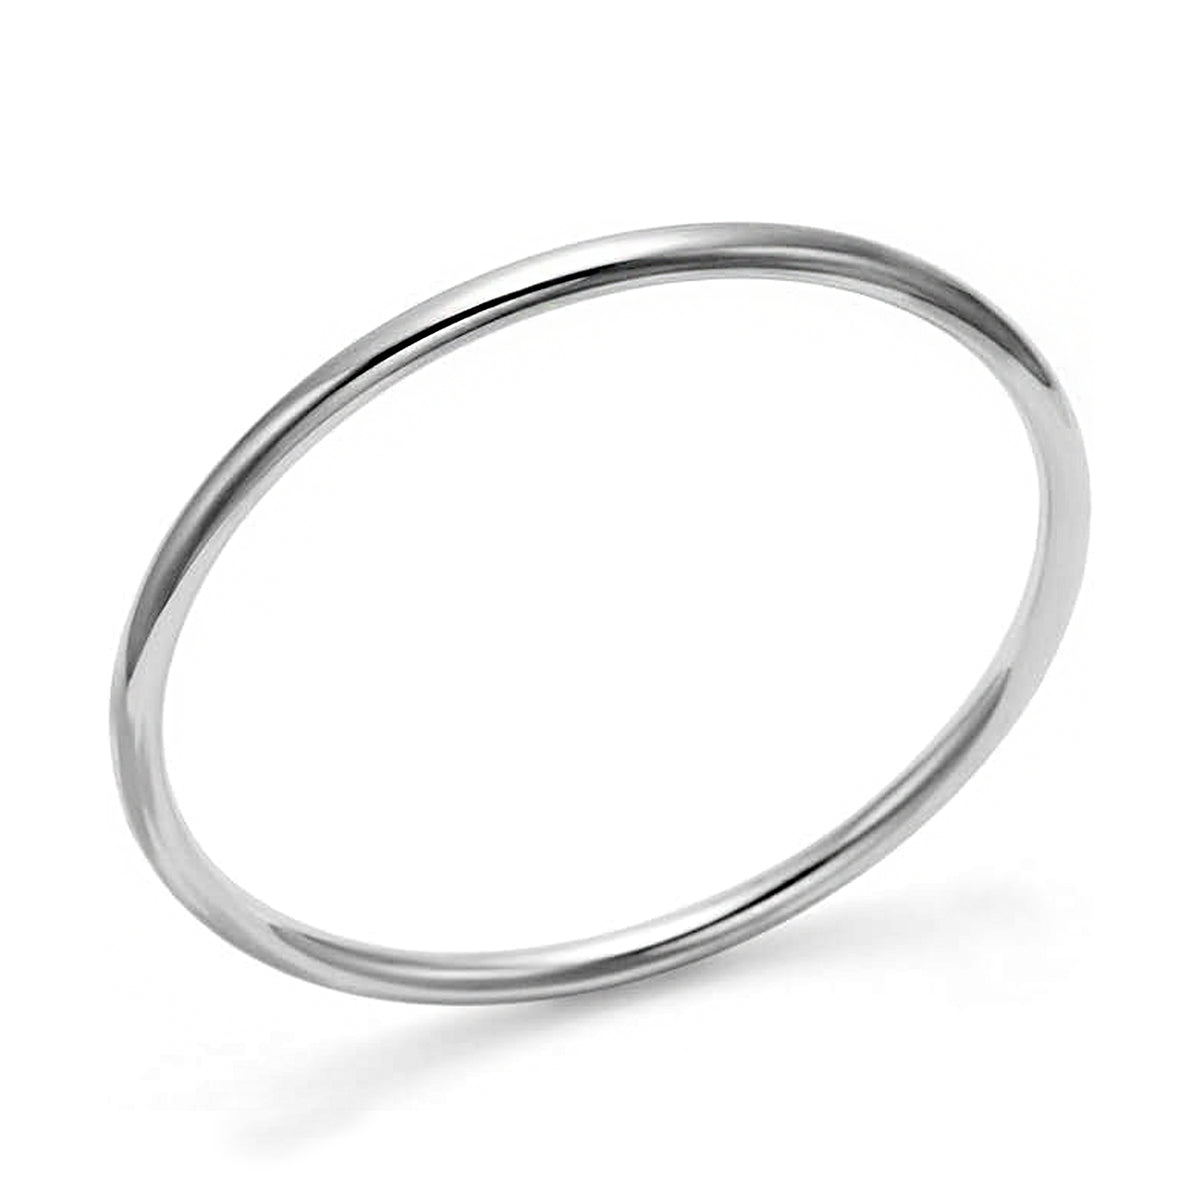 plain round wire silver bangle 3mm thick 60mm inside diameter